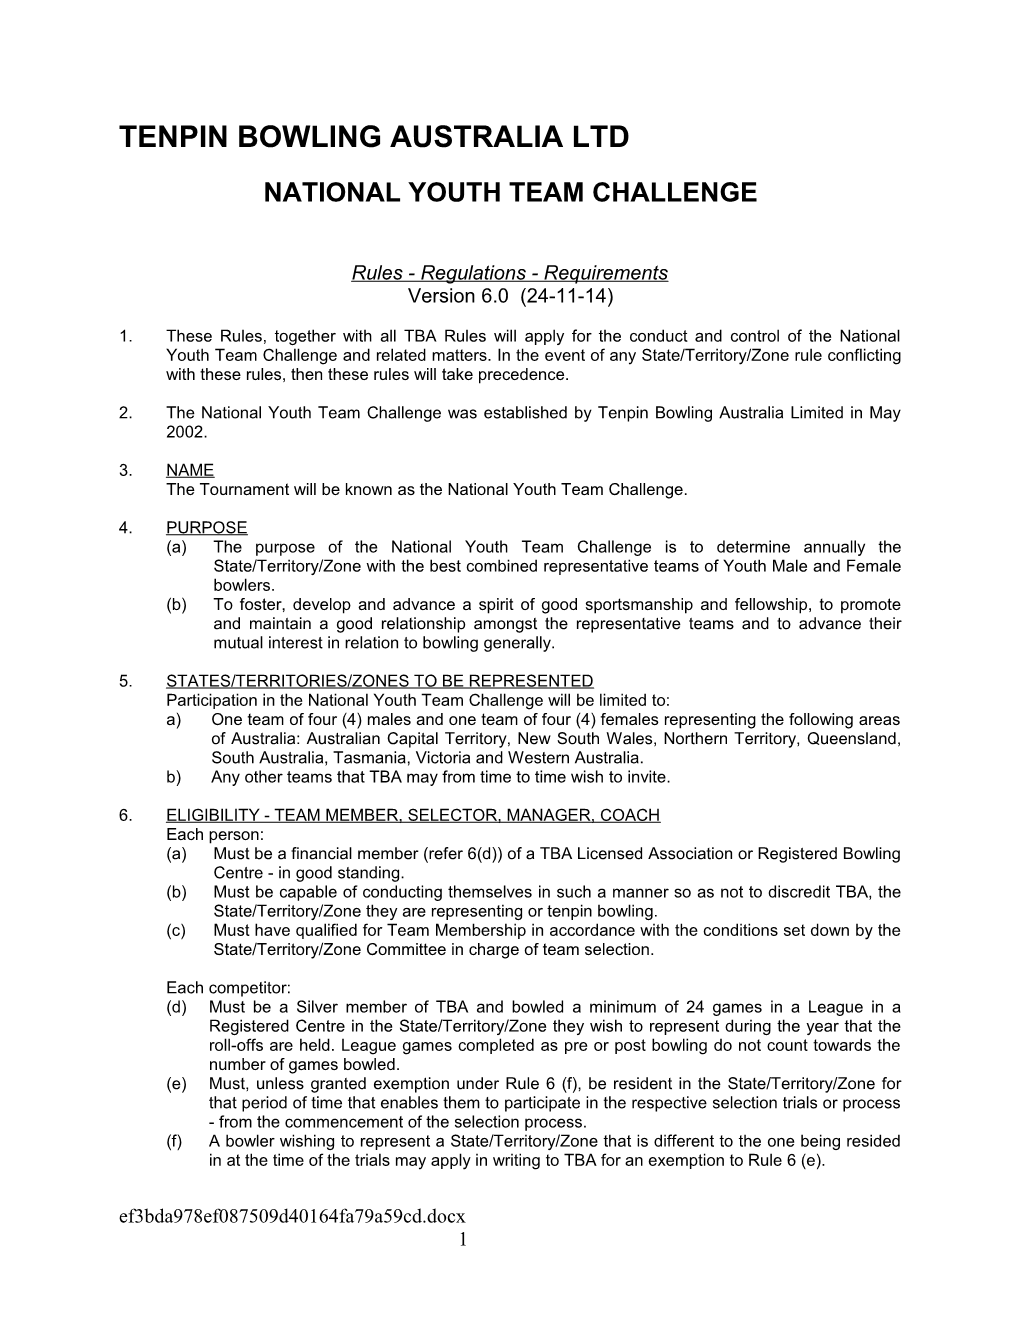 National Youth Team Challenge